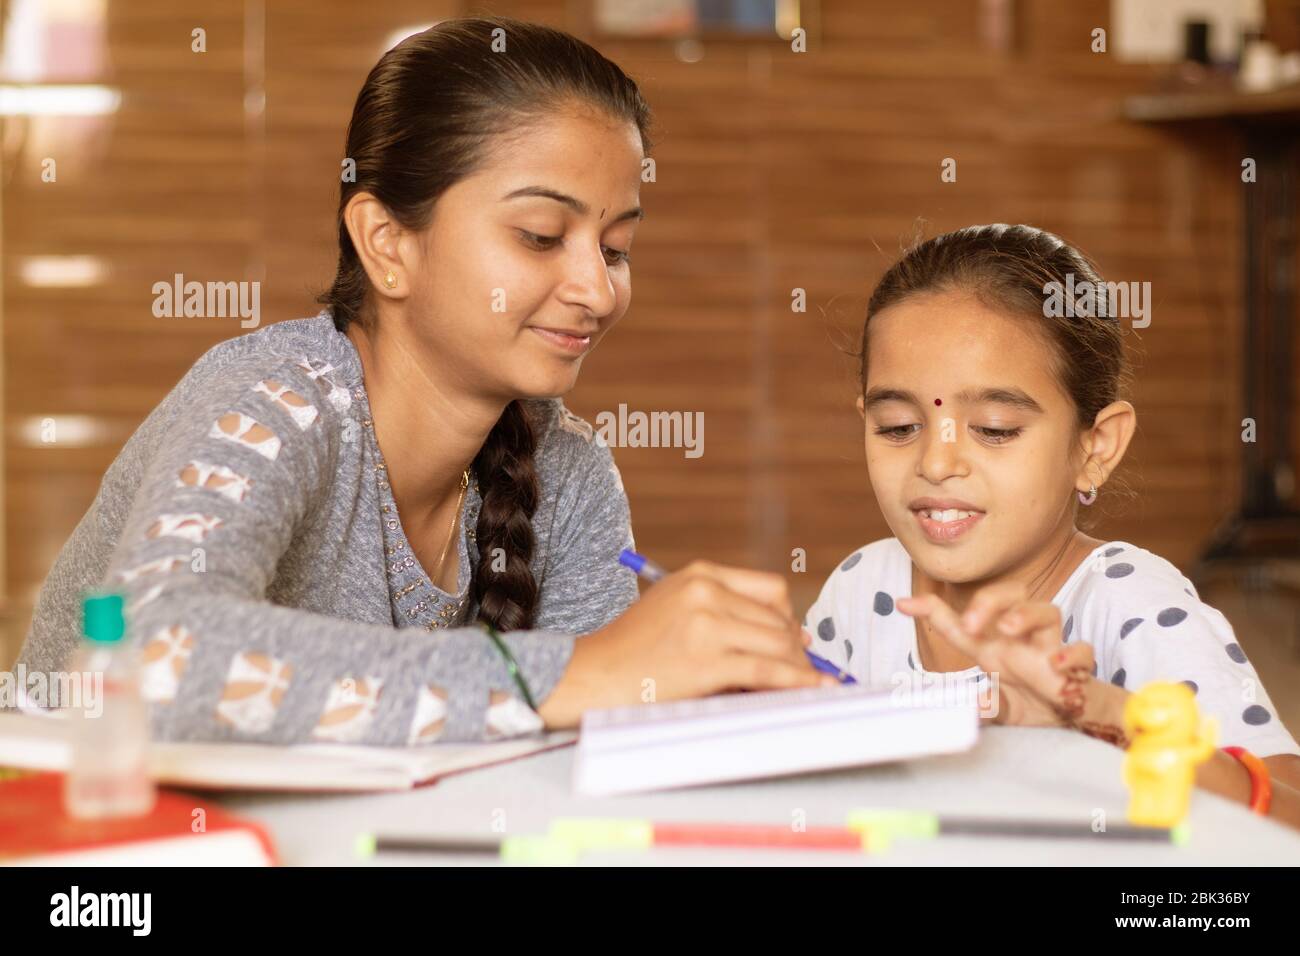 young girl teaching her sister at home - conept of homeschooling during coronavirus or covid-19 lockdown pandemic. Stock Photo